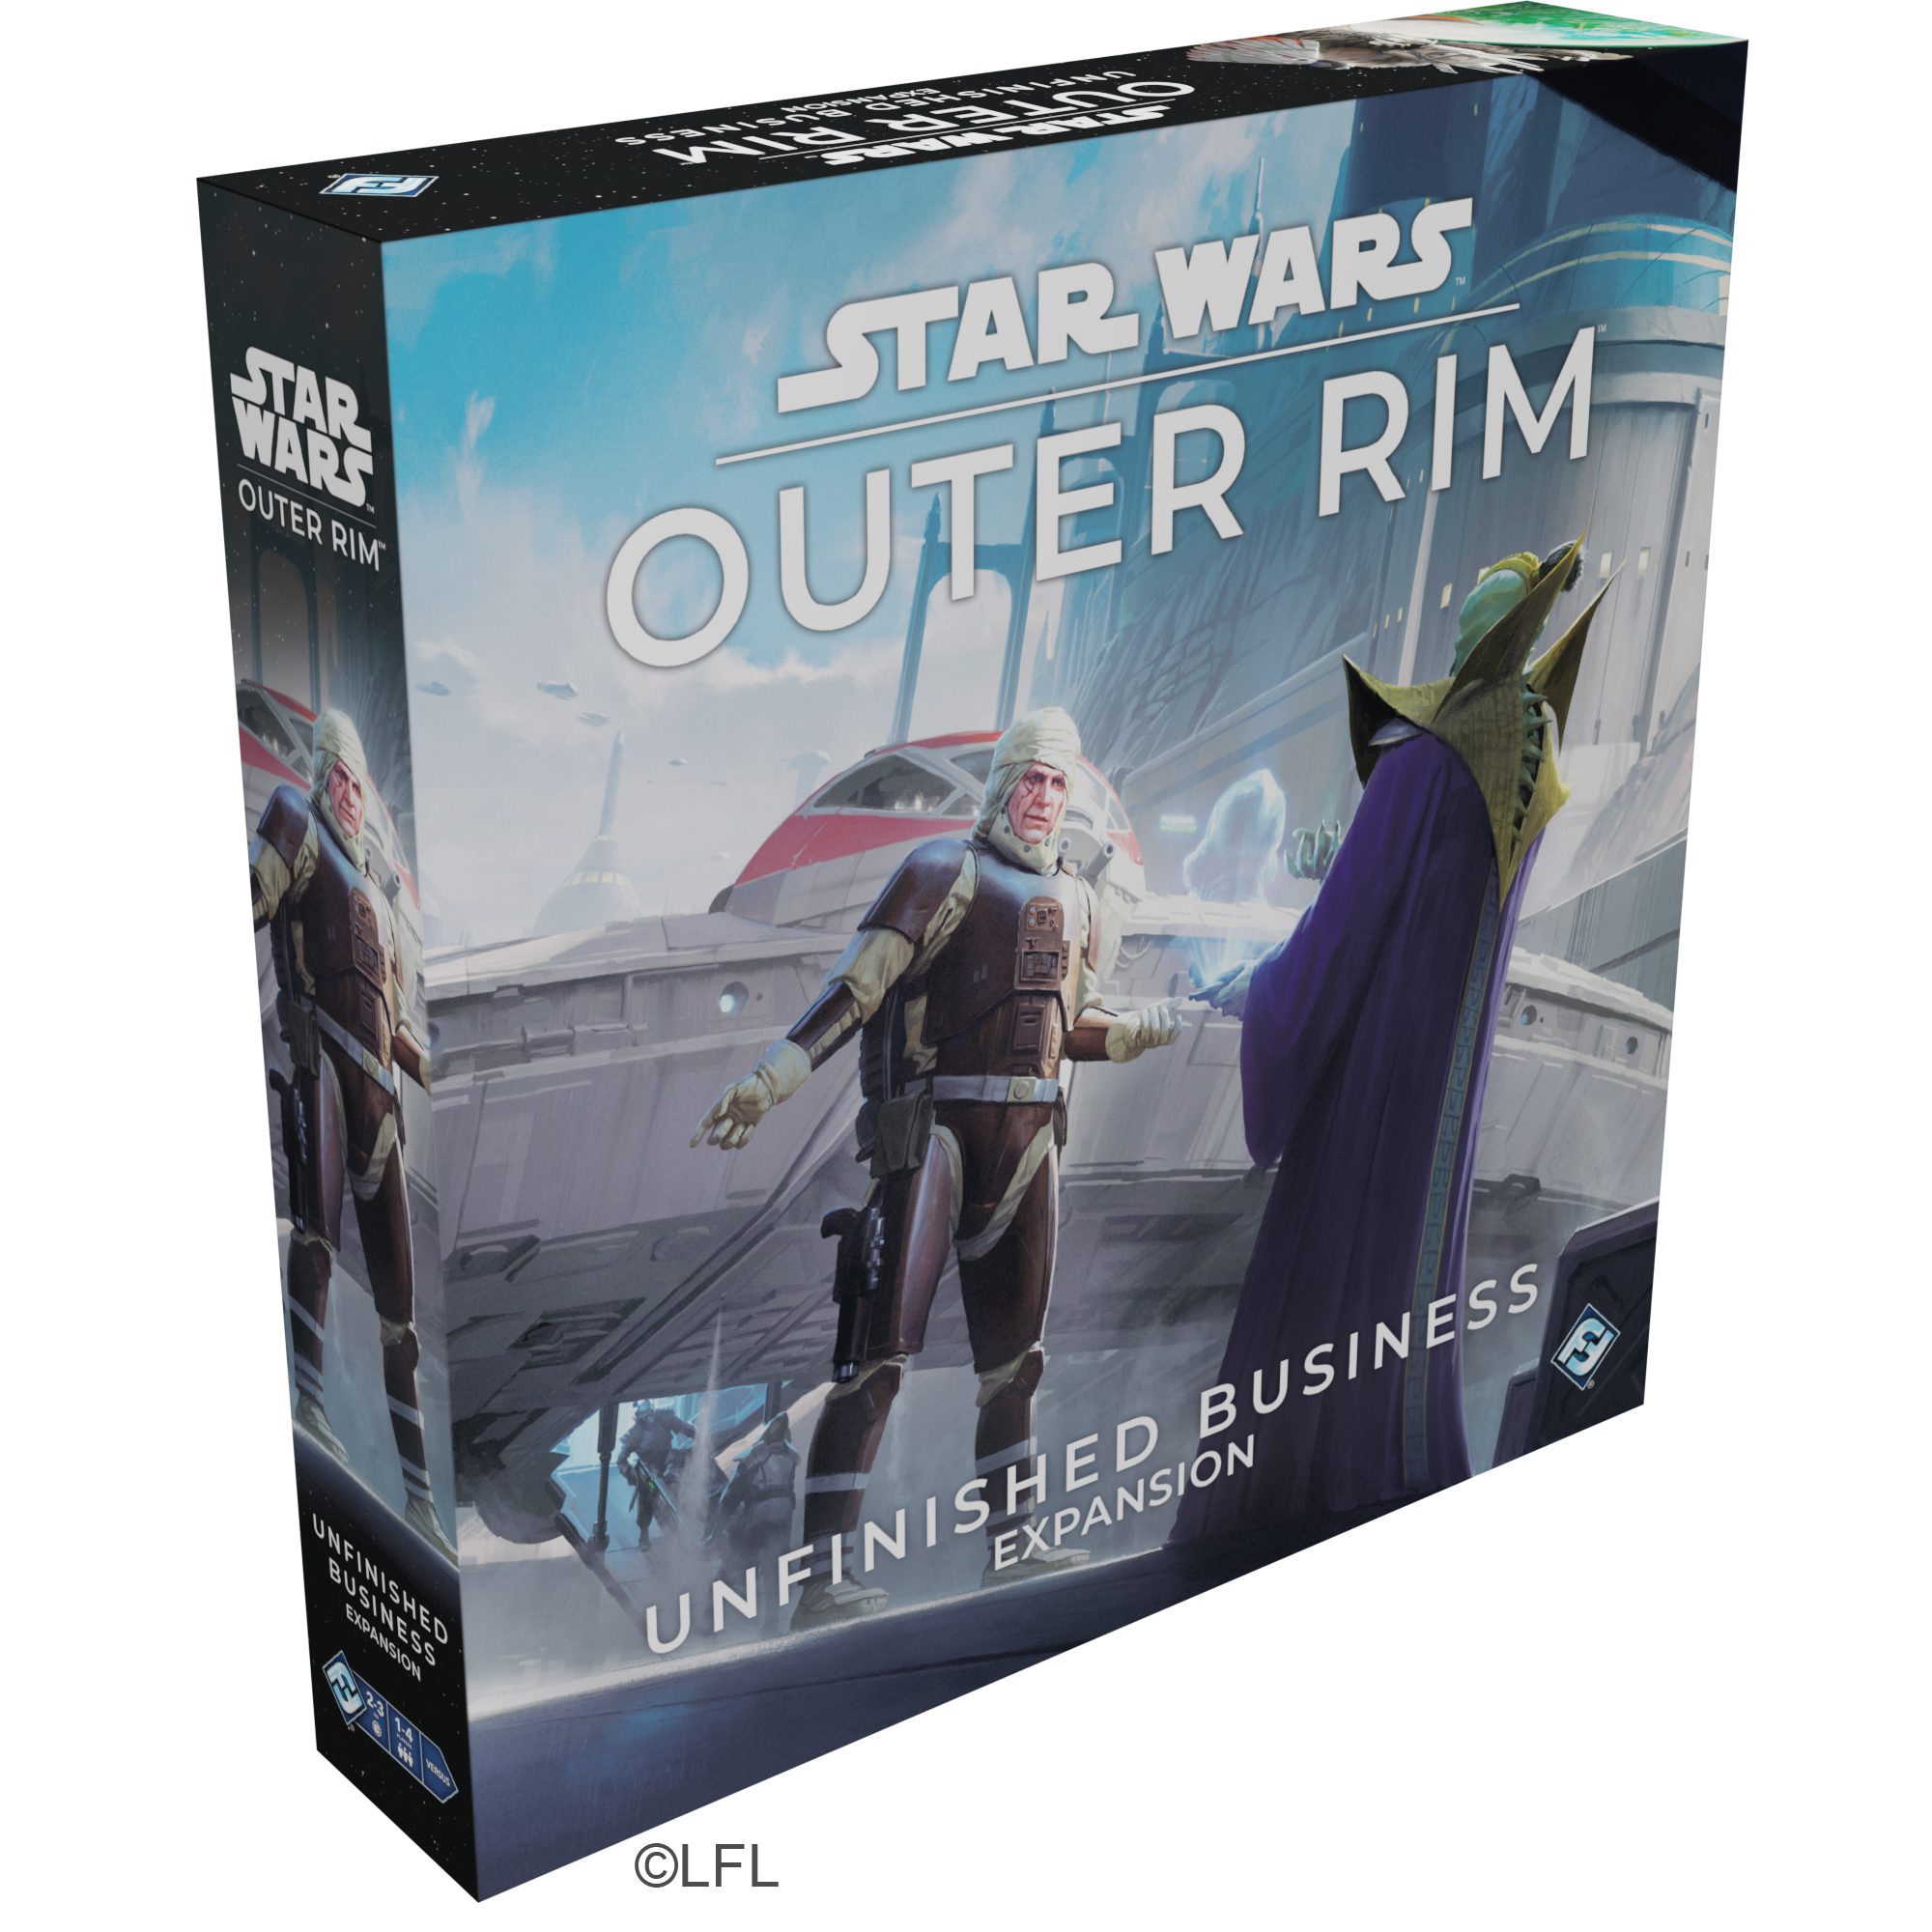 Star Wars Outer Rim Unfinished Business Expansion box 